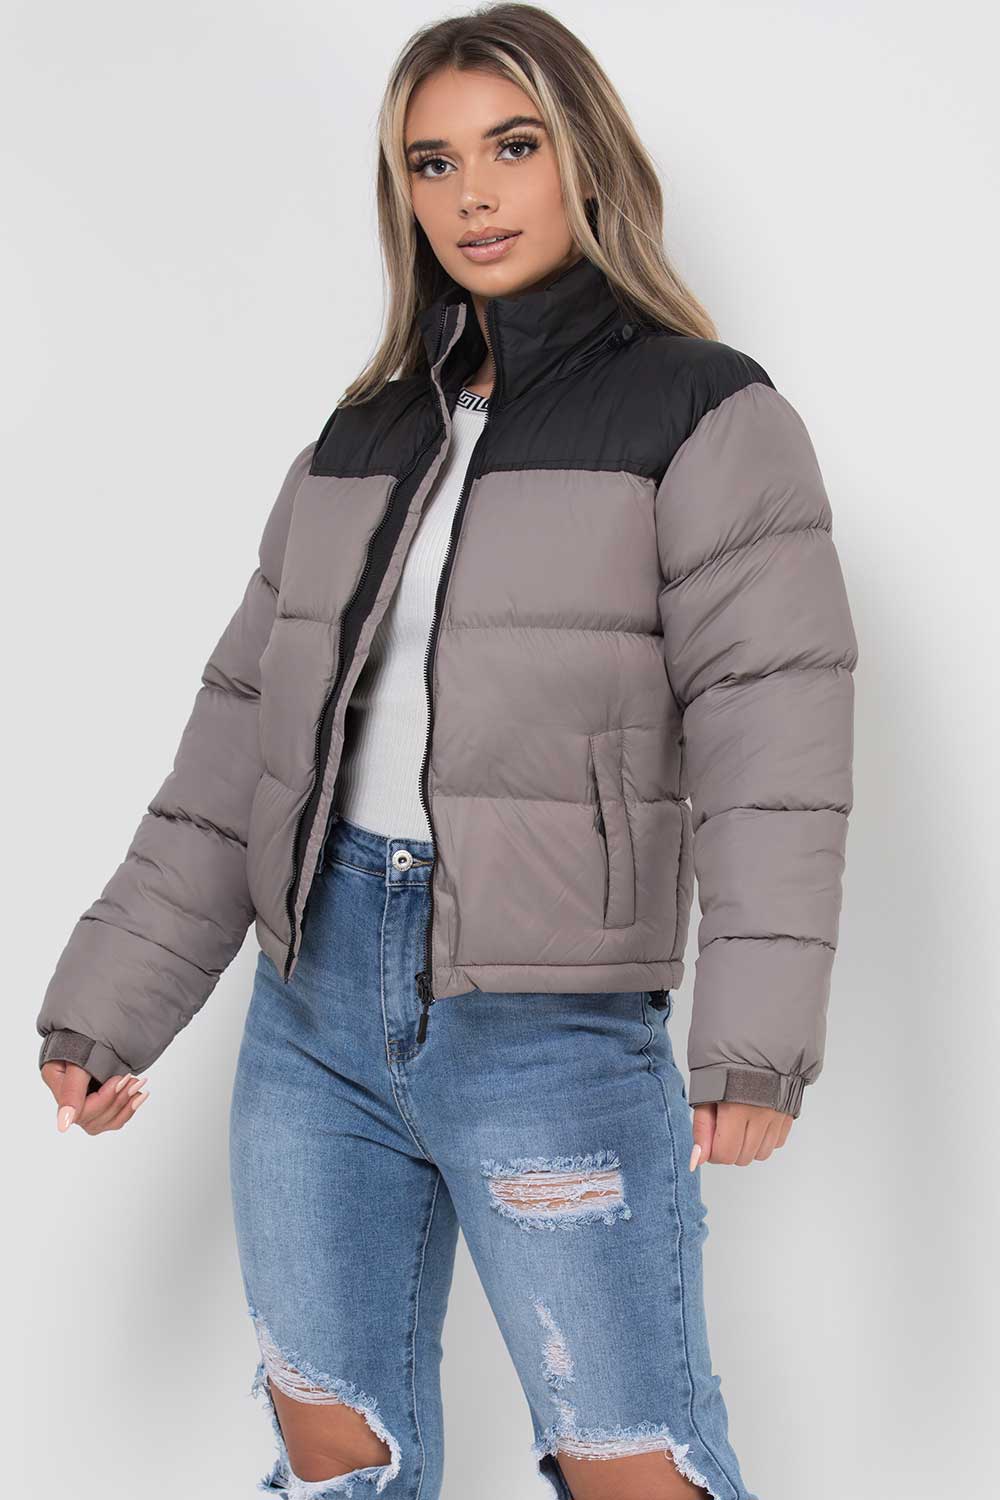 padded puffer quilted crop jacket north face inspired